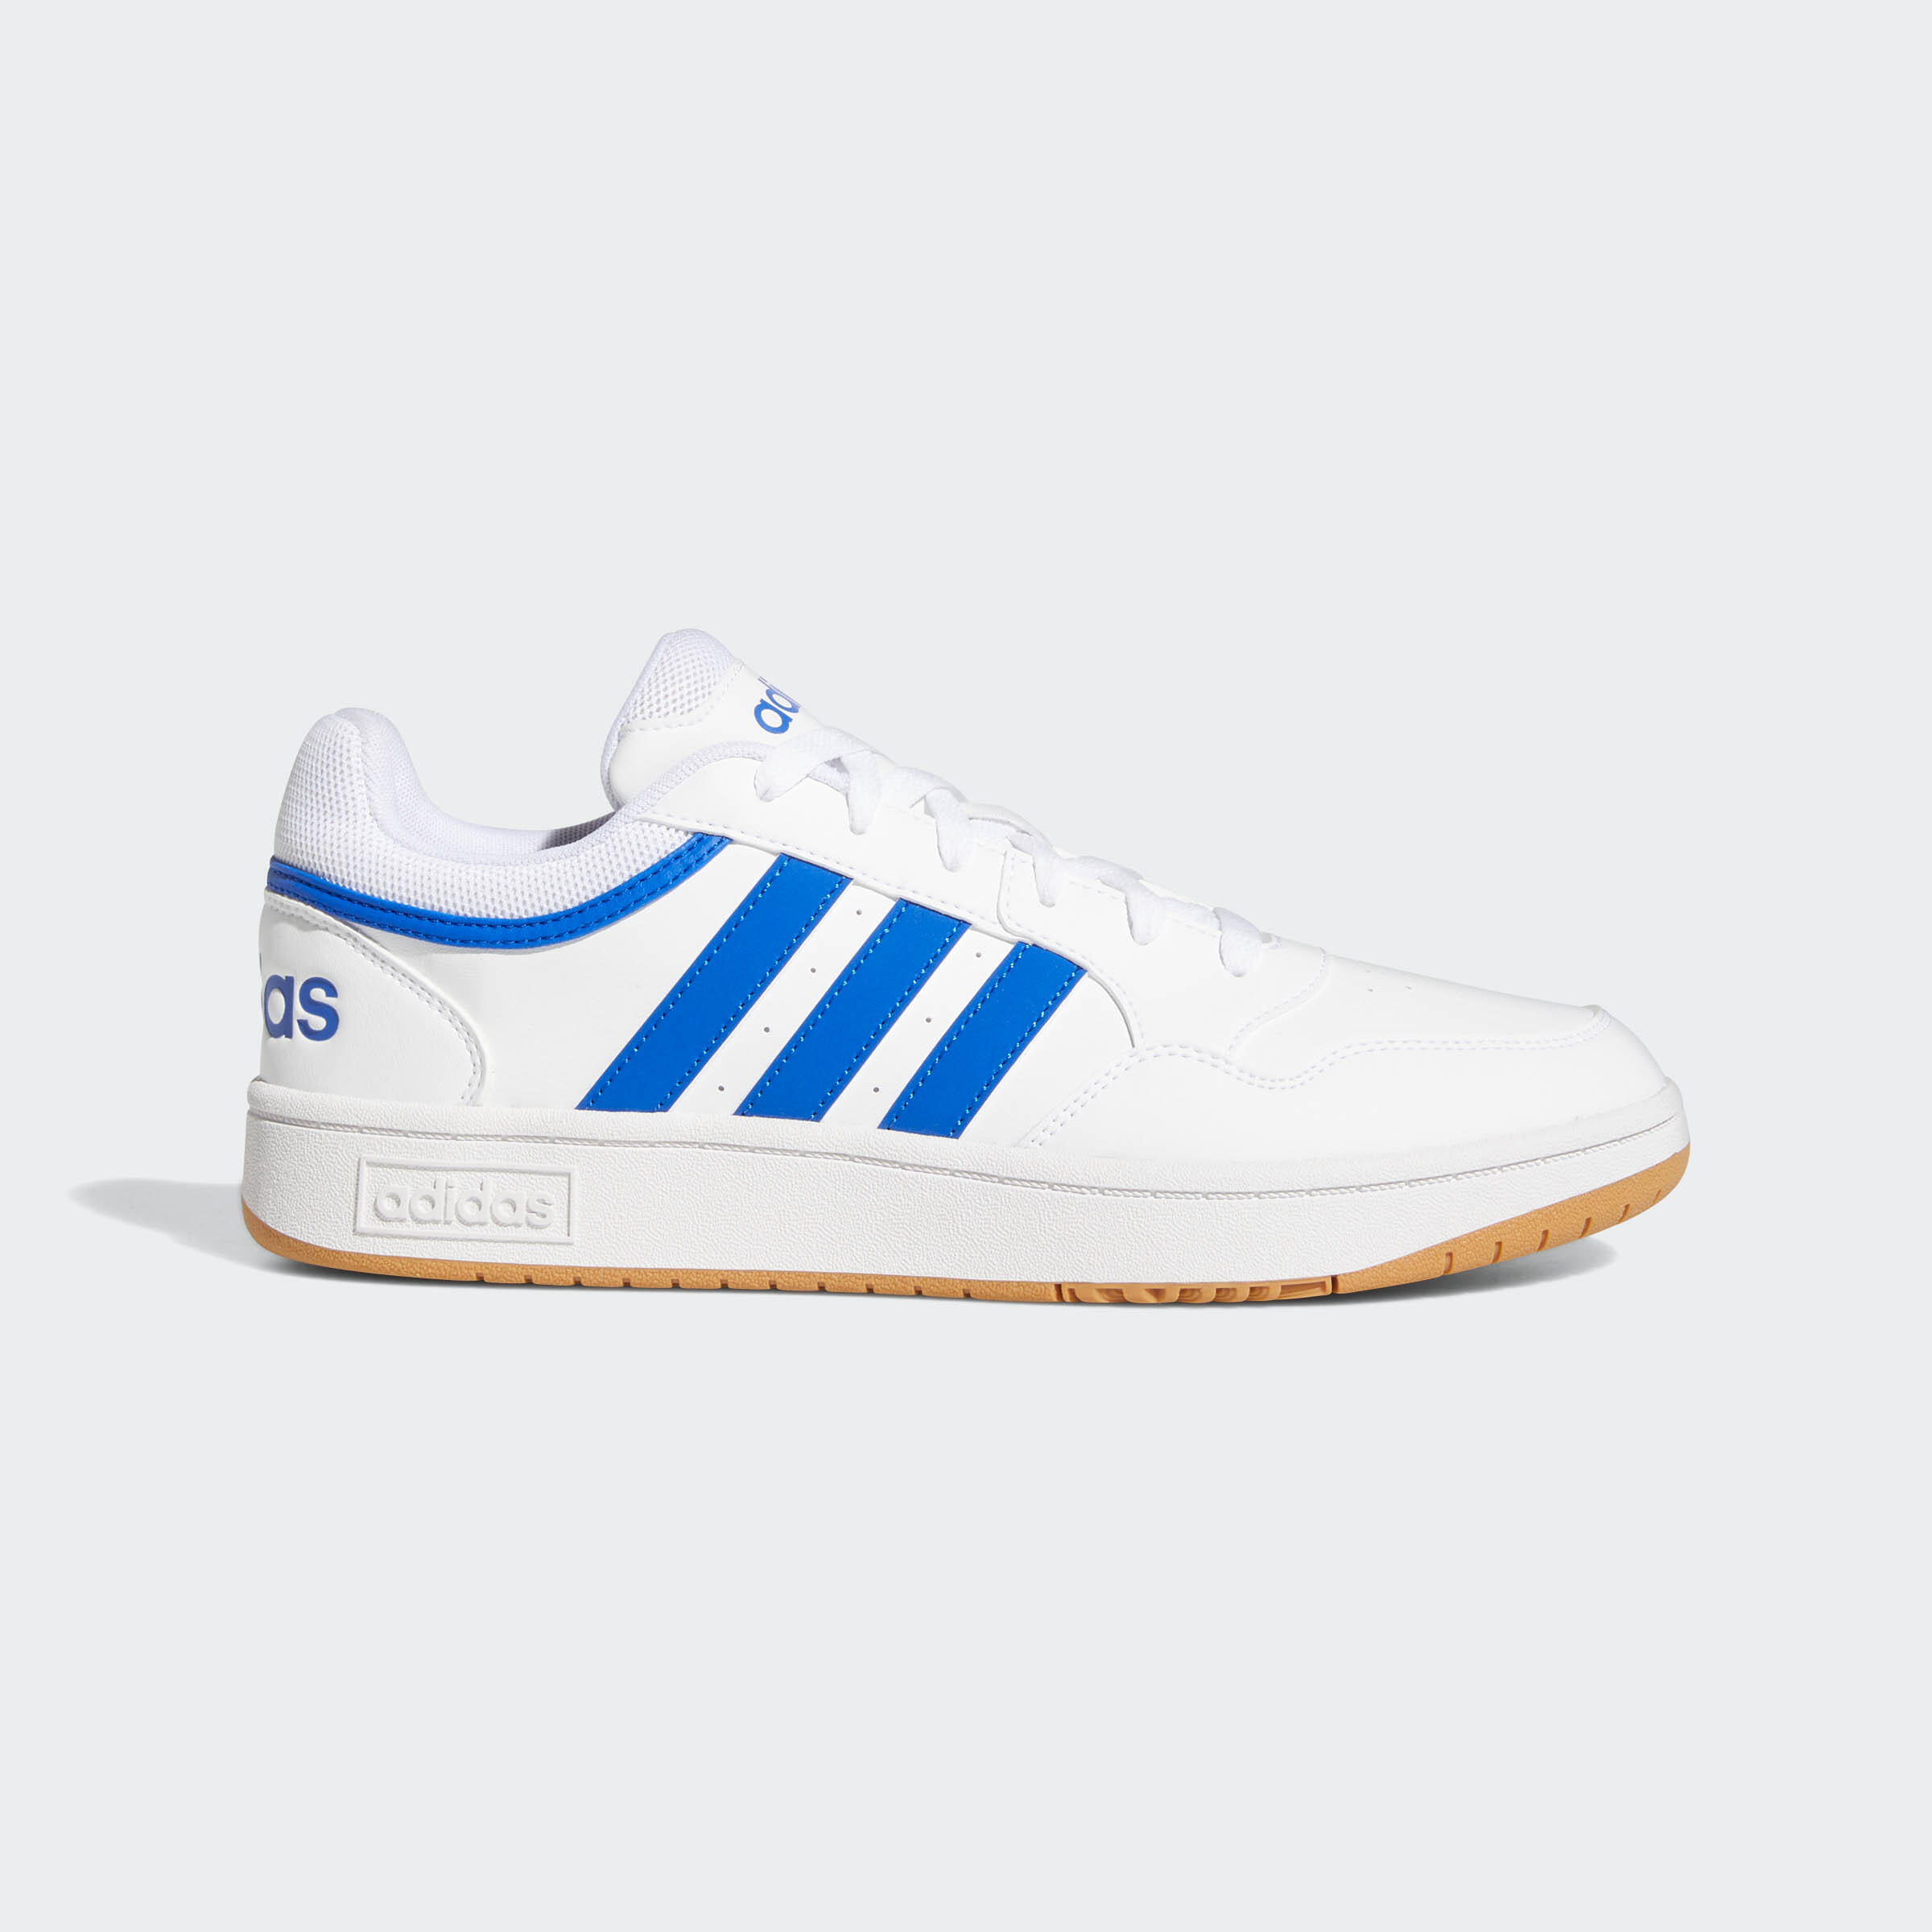 ADIDAS MEN'S ADIDAS HOOPS 3 SHOES - WHITE